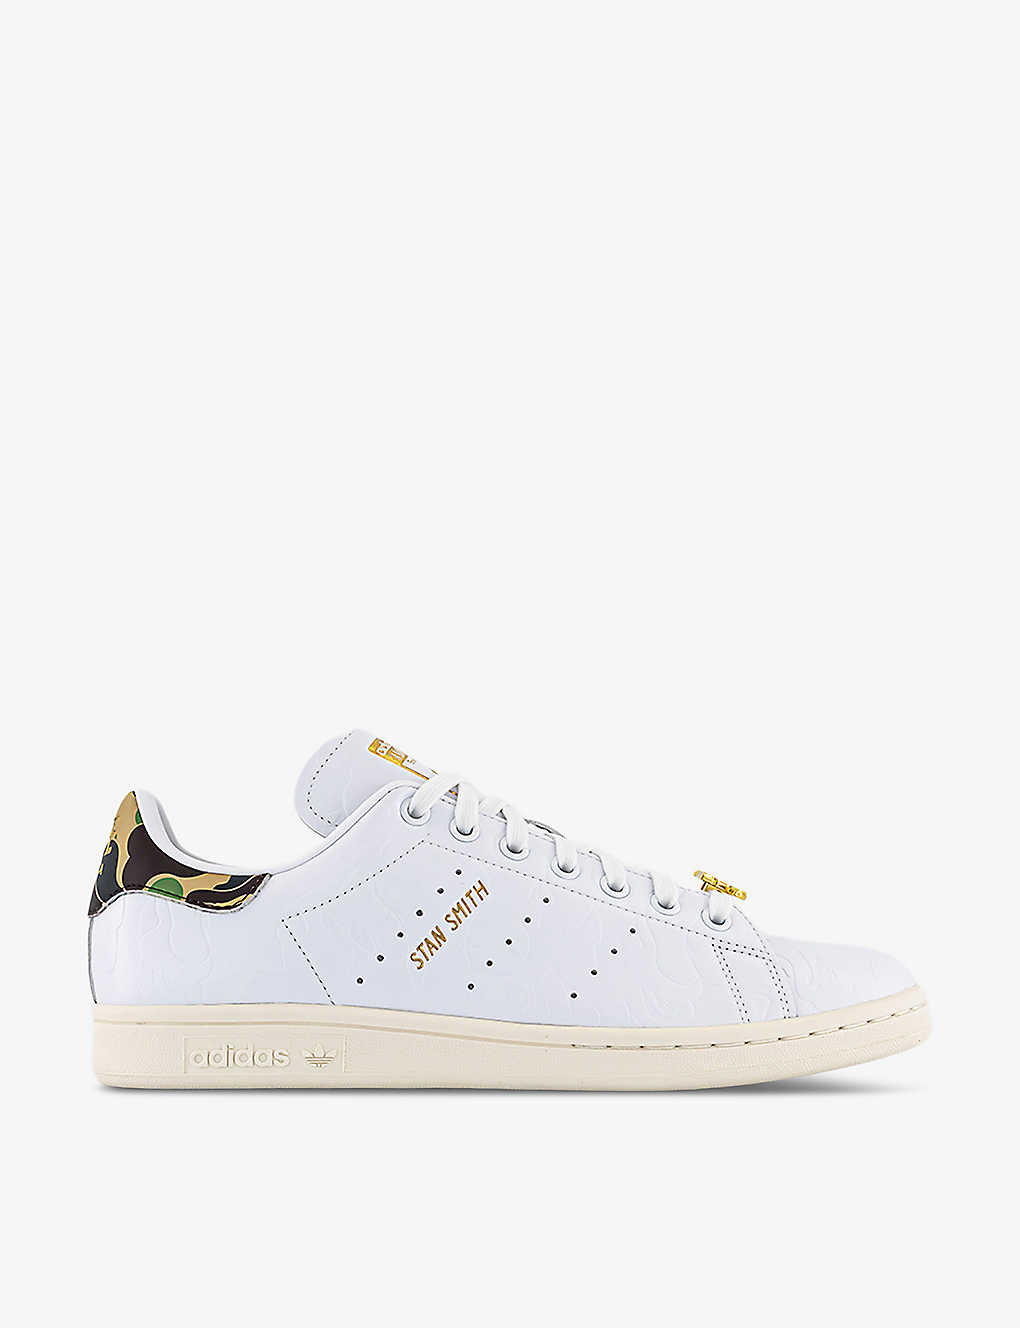 Adidas Statement Mens White Adidas X Bape Stan Smith Leather Low-top Trainers